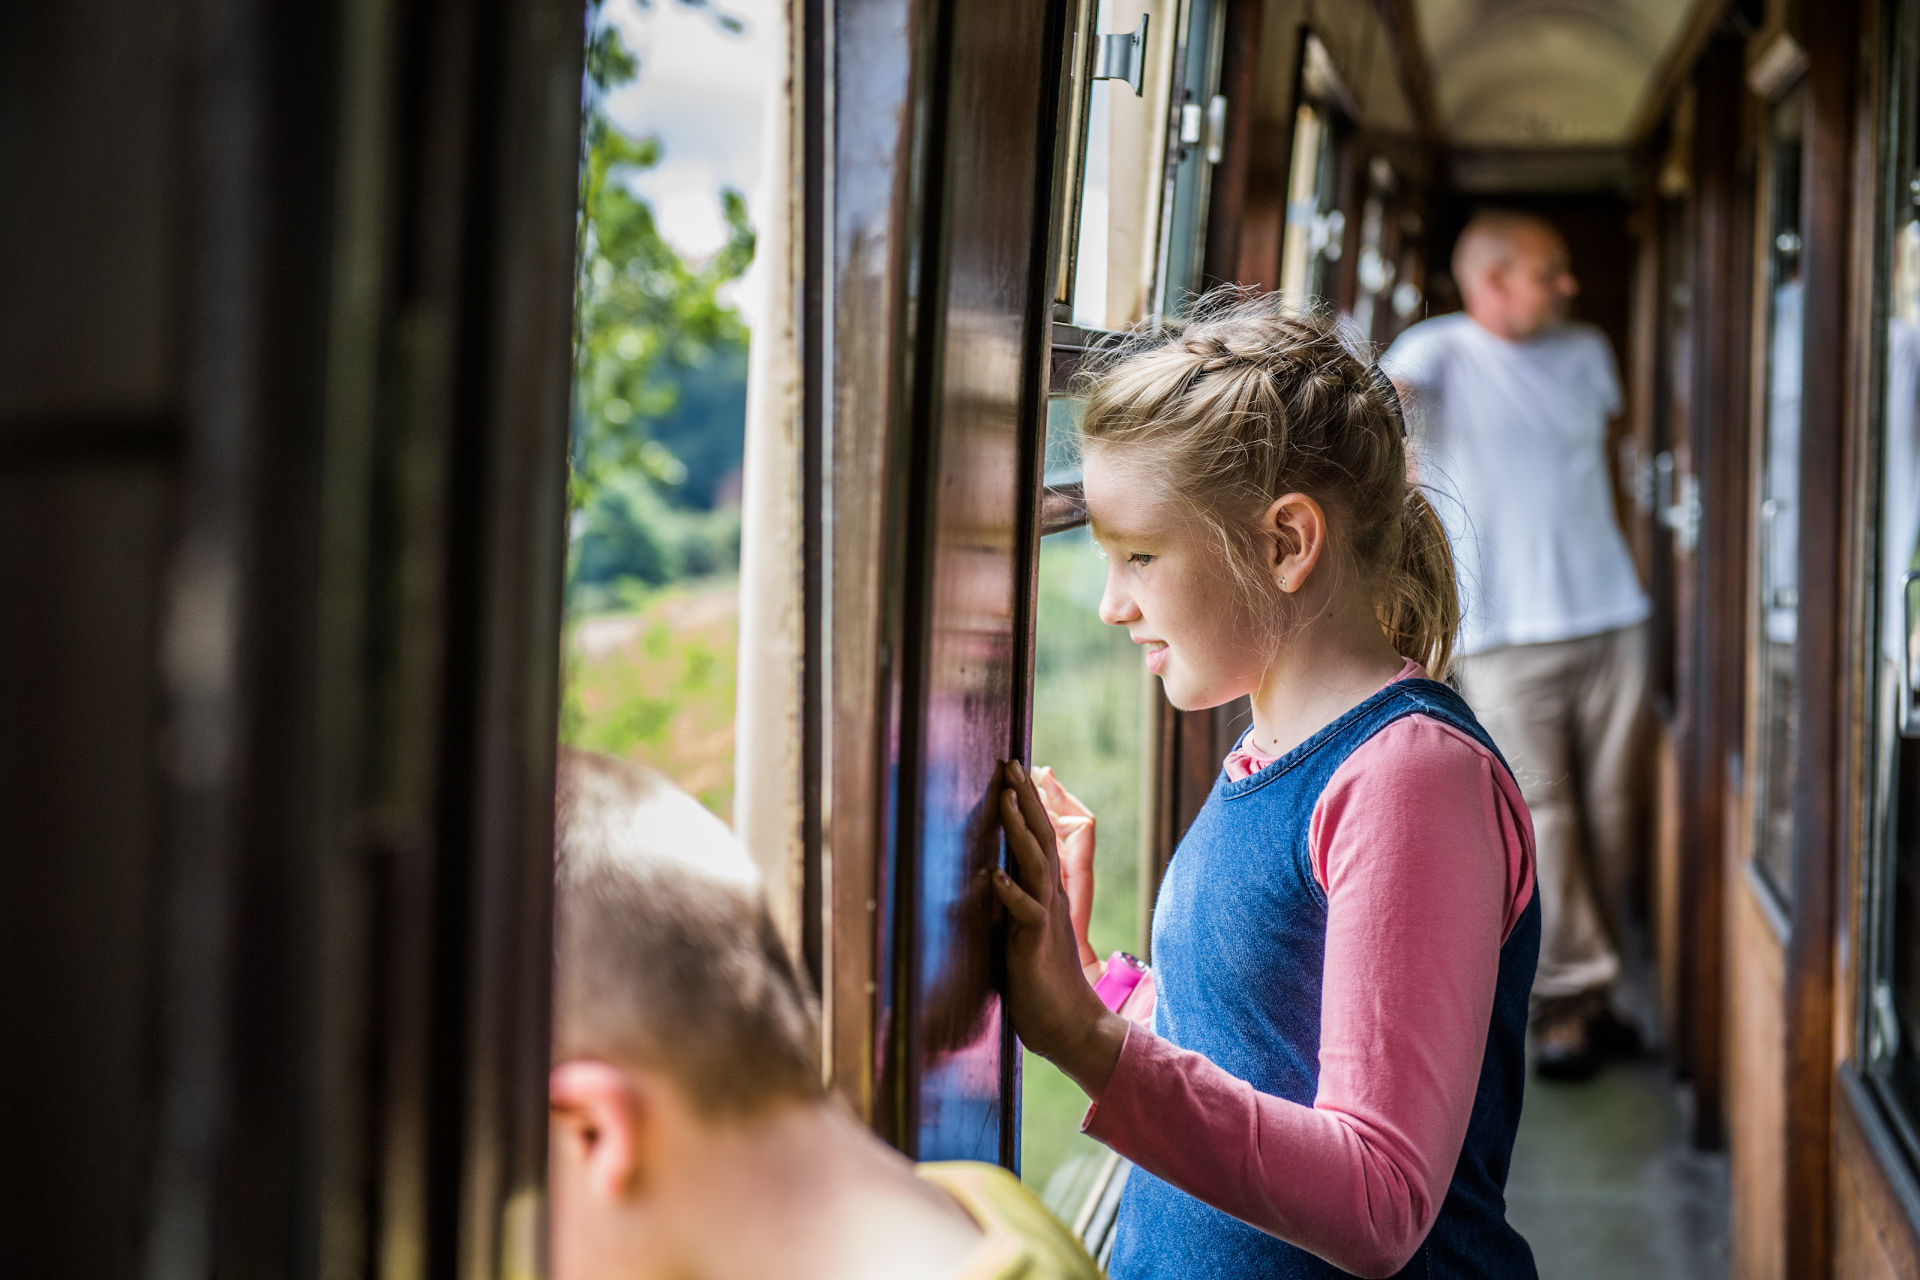 A young girl looks out the window of a heritage train coach